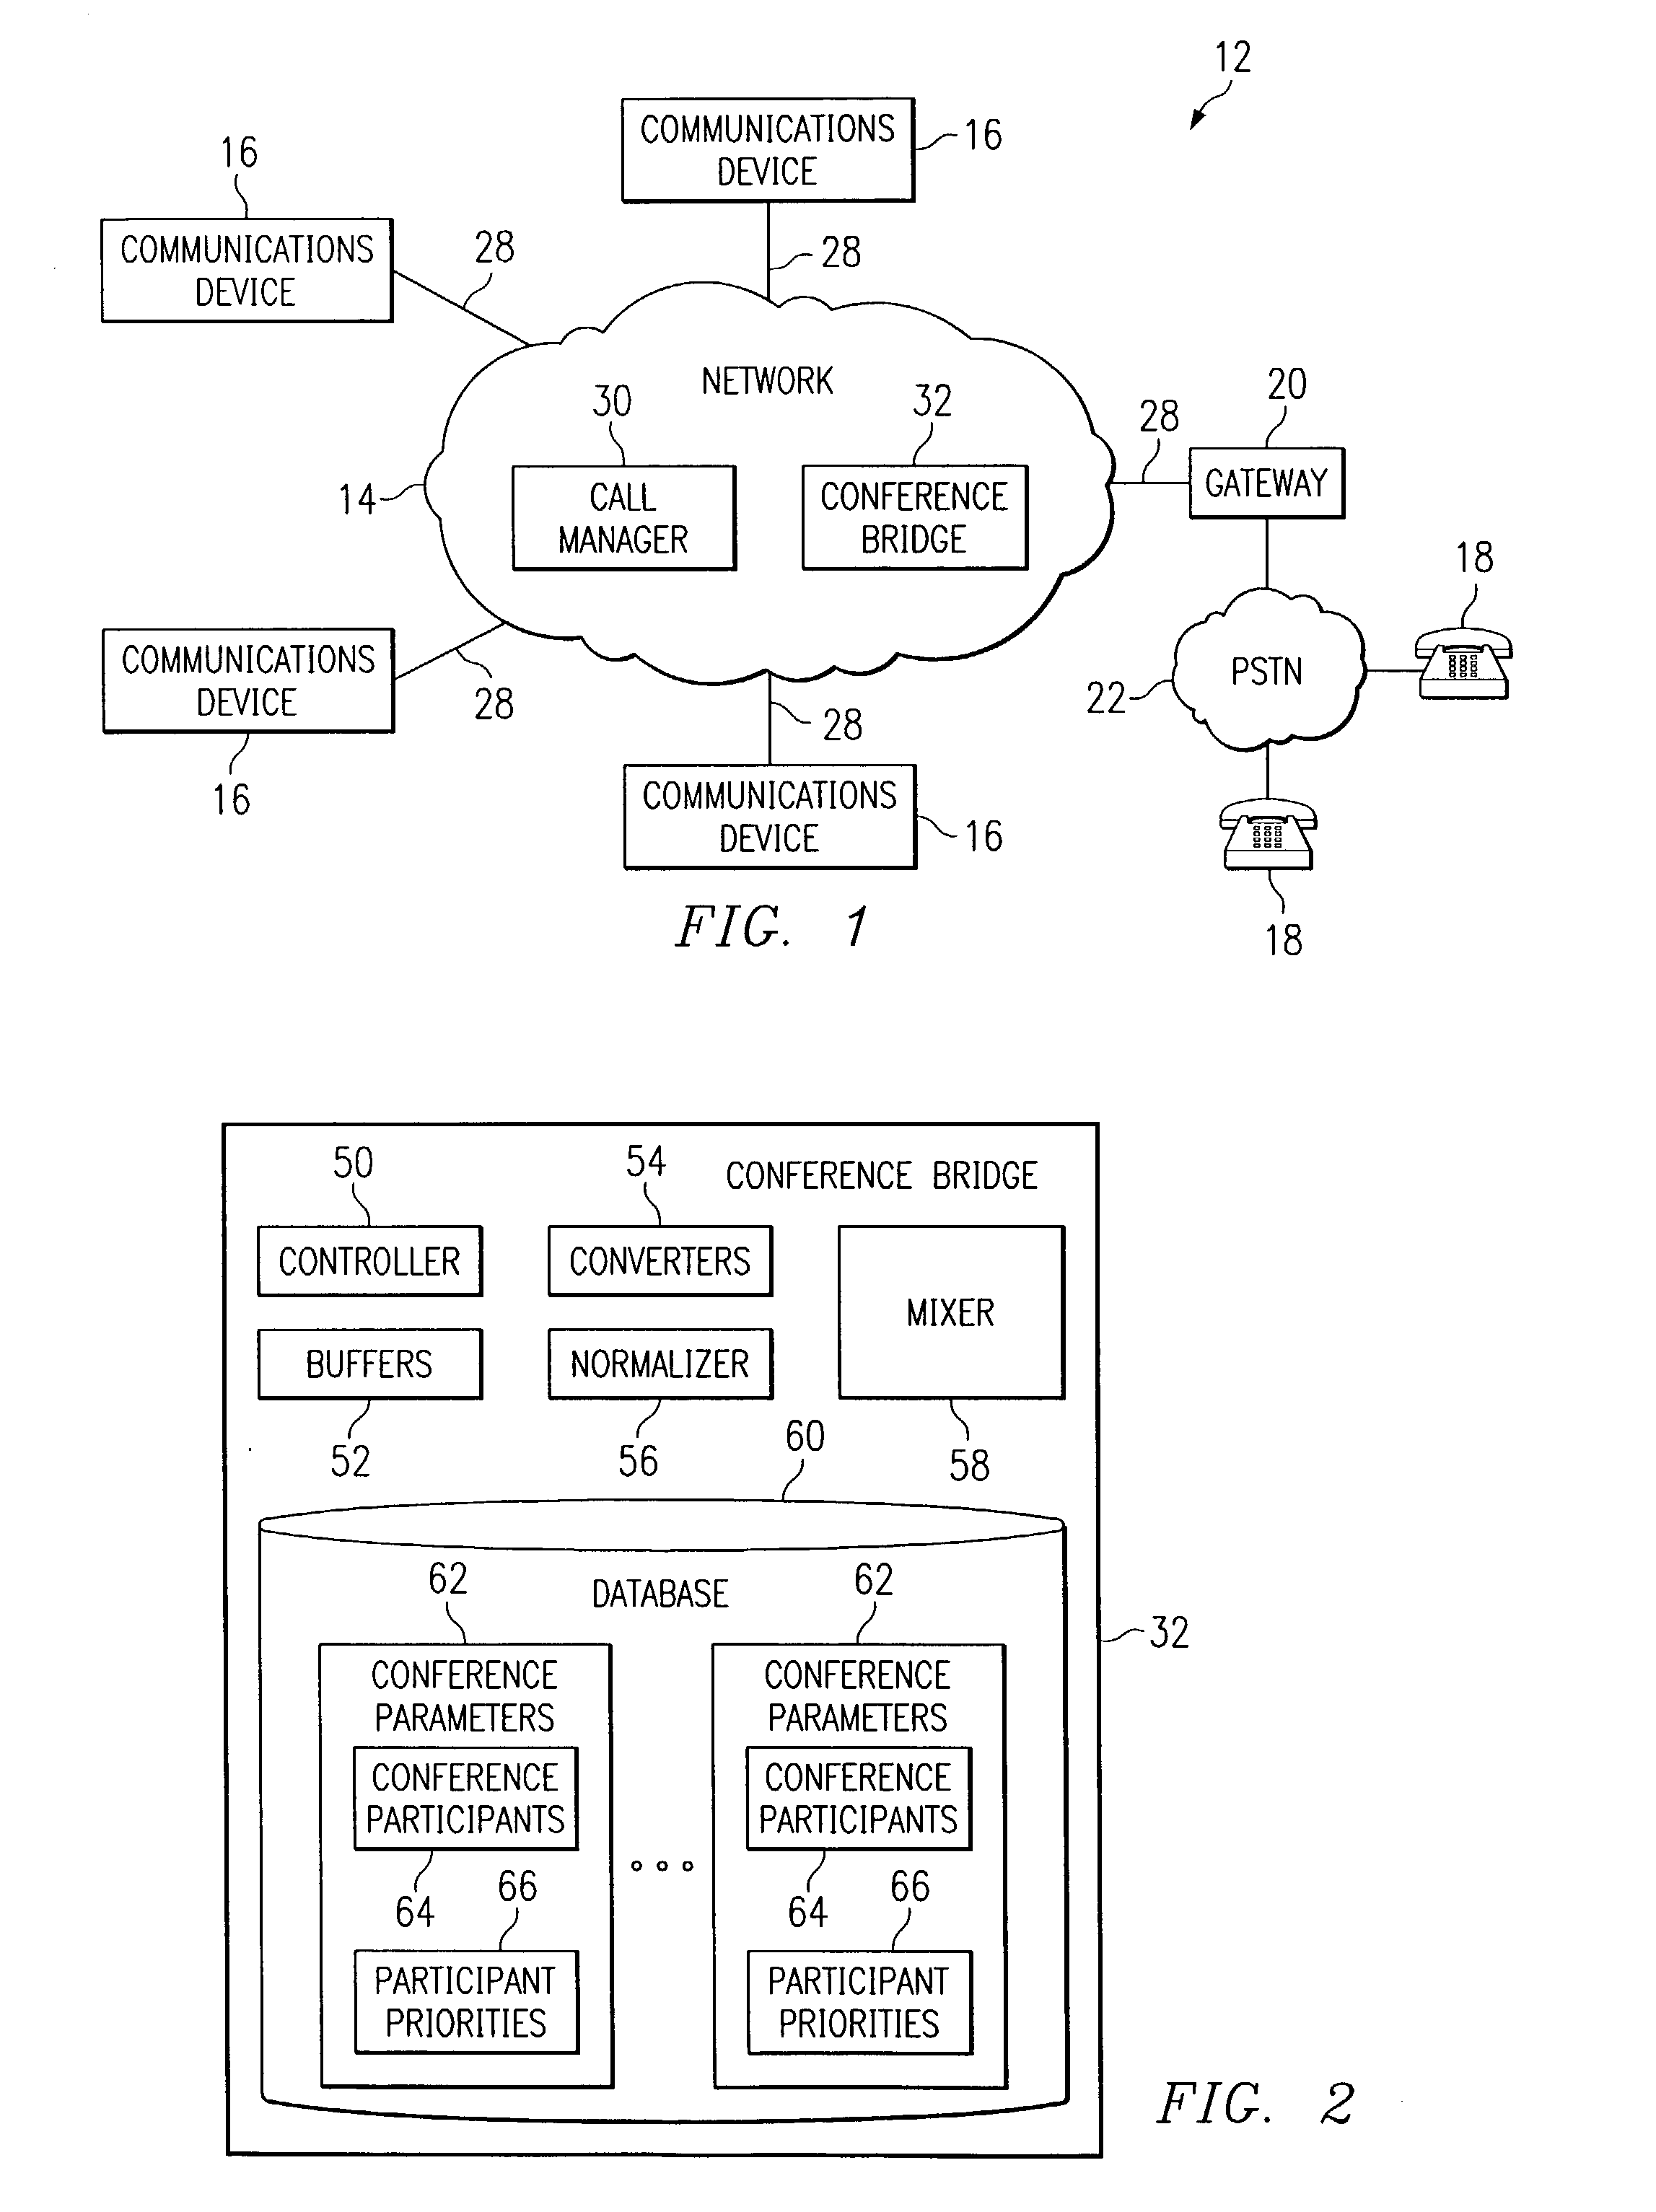 Method and system for improving the intelligibility of a moderator during a multiparty communication session